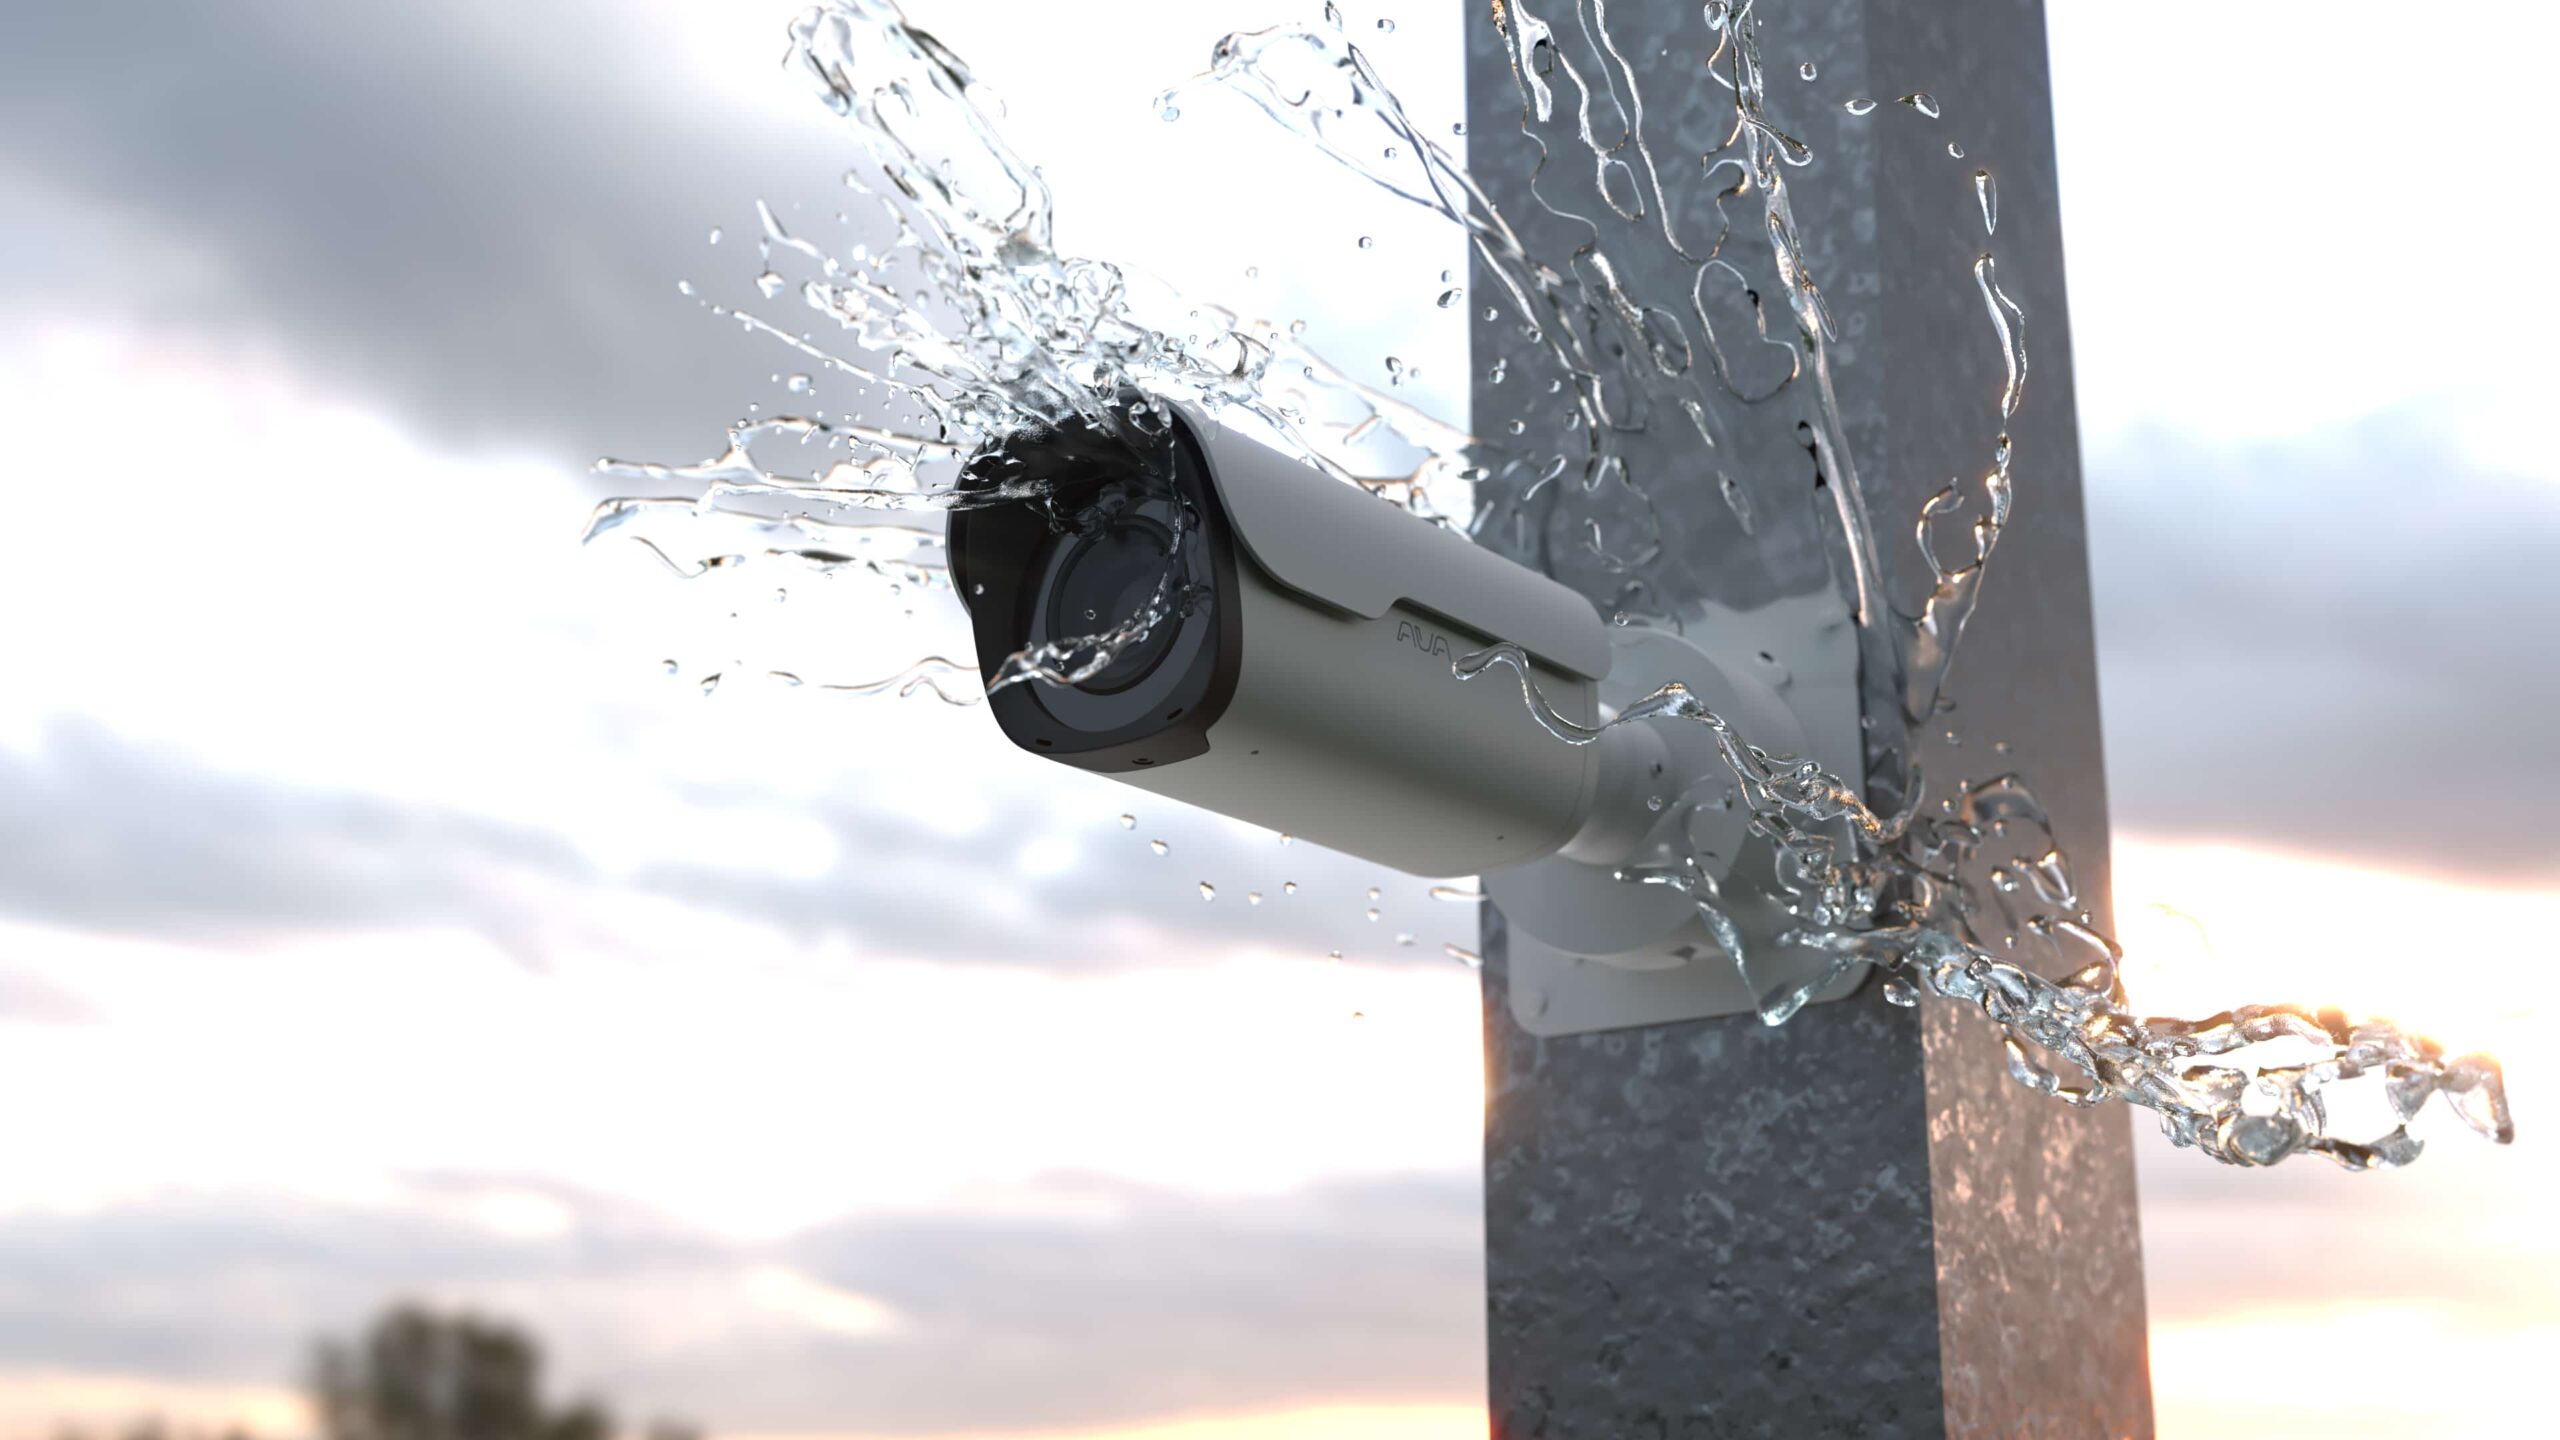 Next generation security camera splashed by water